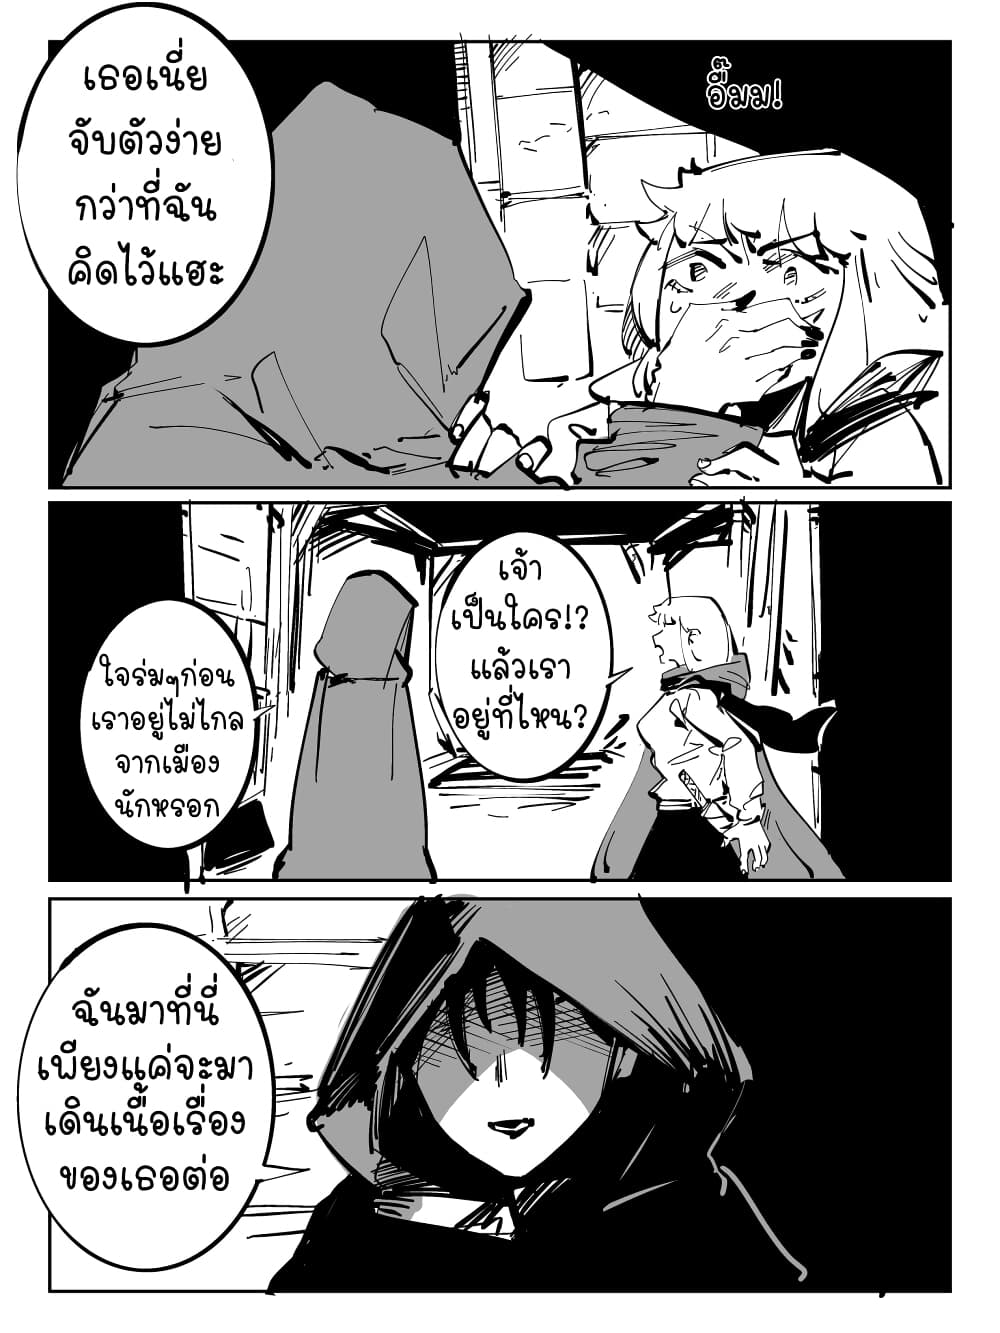 The Witch and the Knight21 (1)